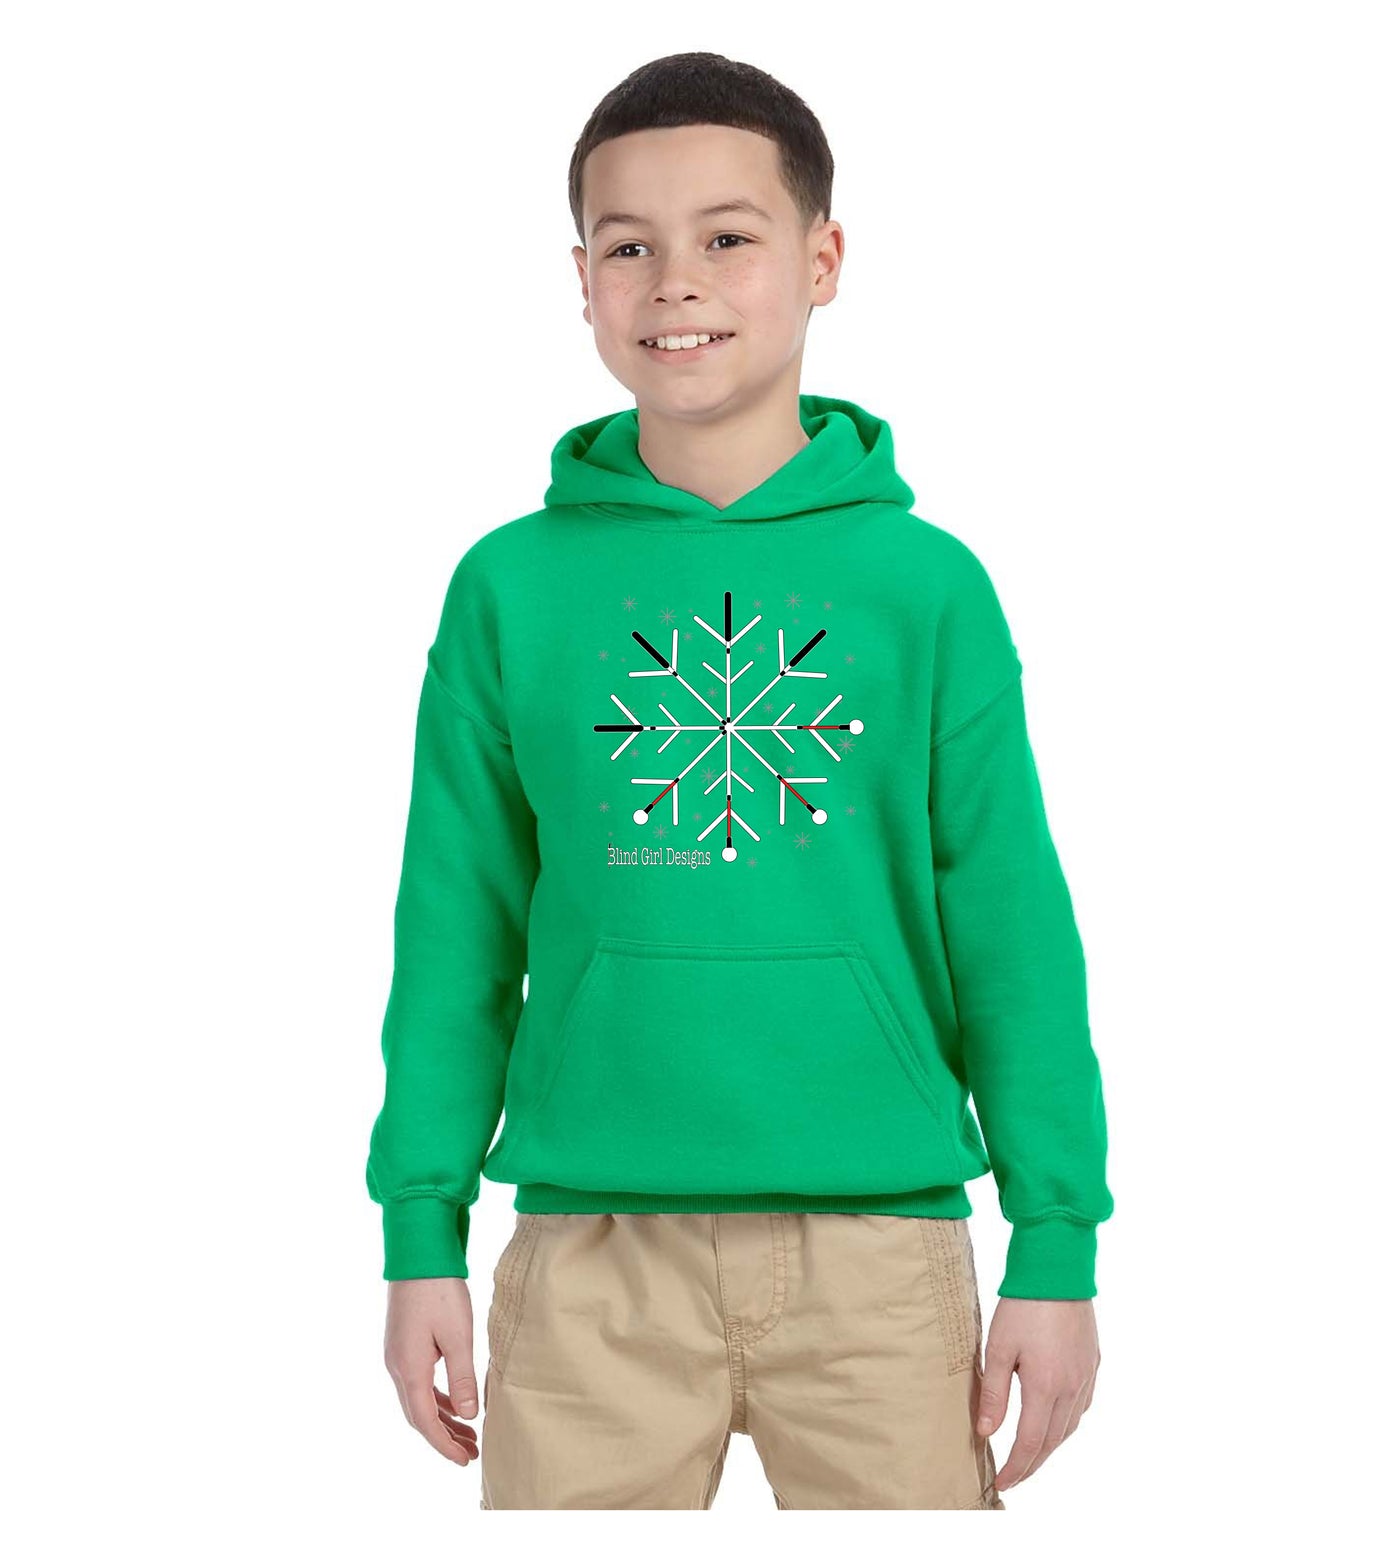 Kids and Toddlers Snowflake White Cane Hoodie - Green